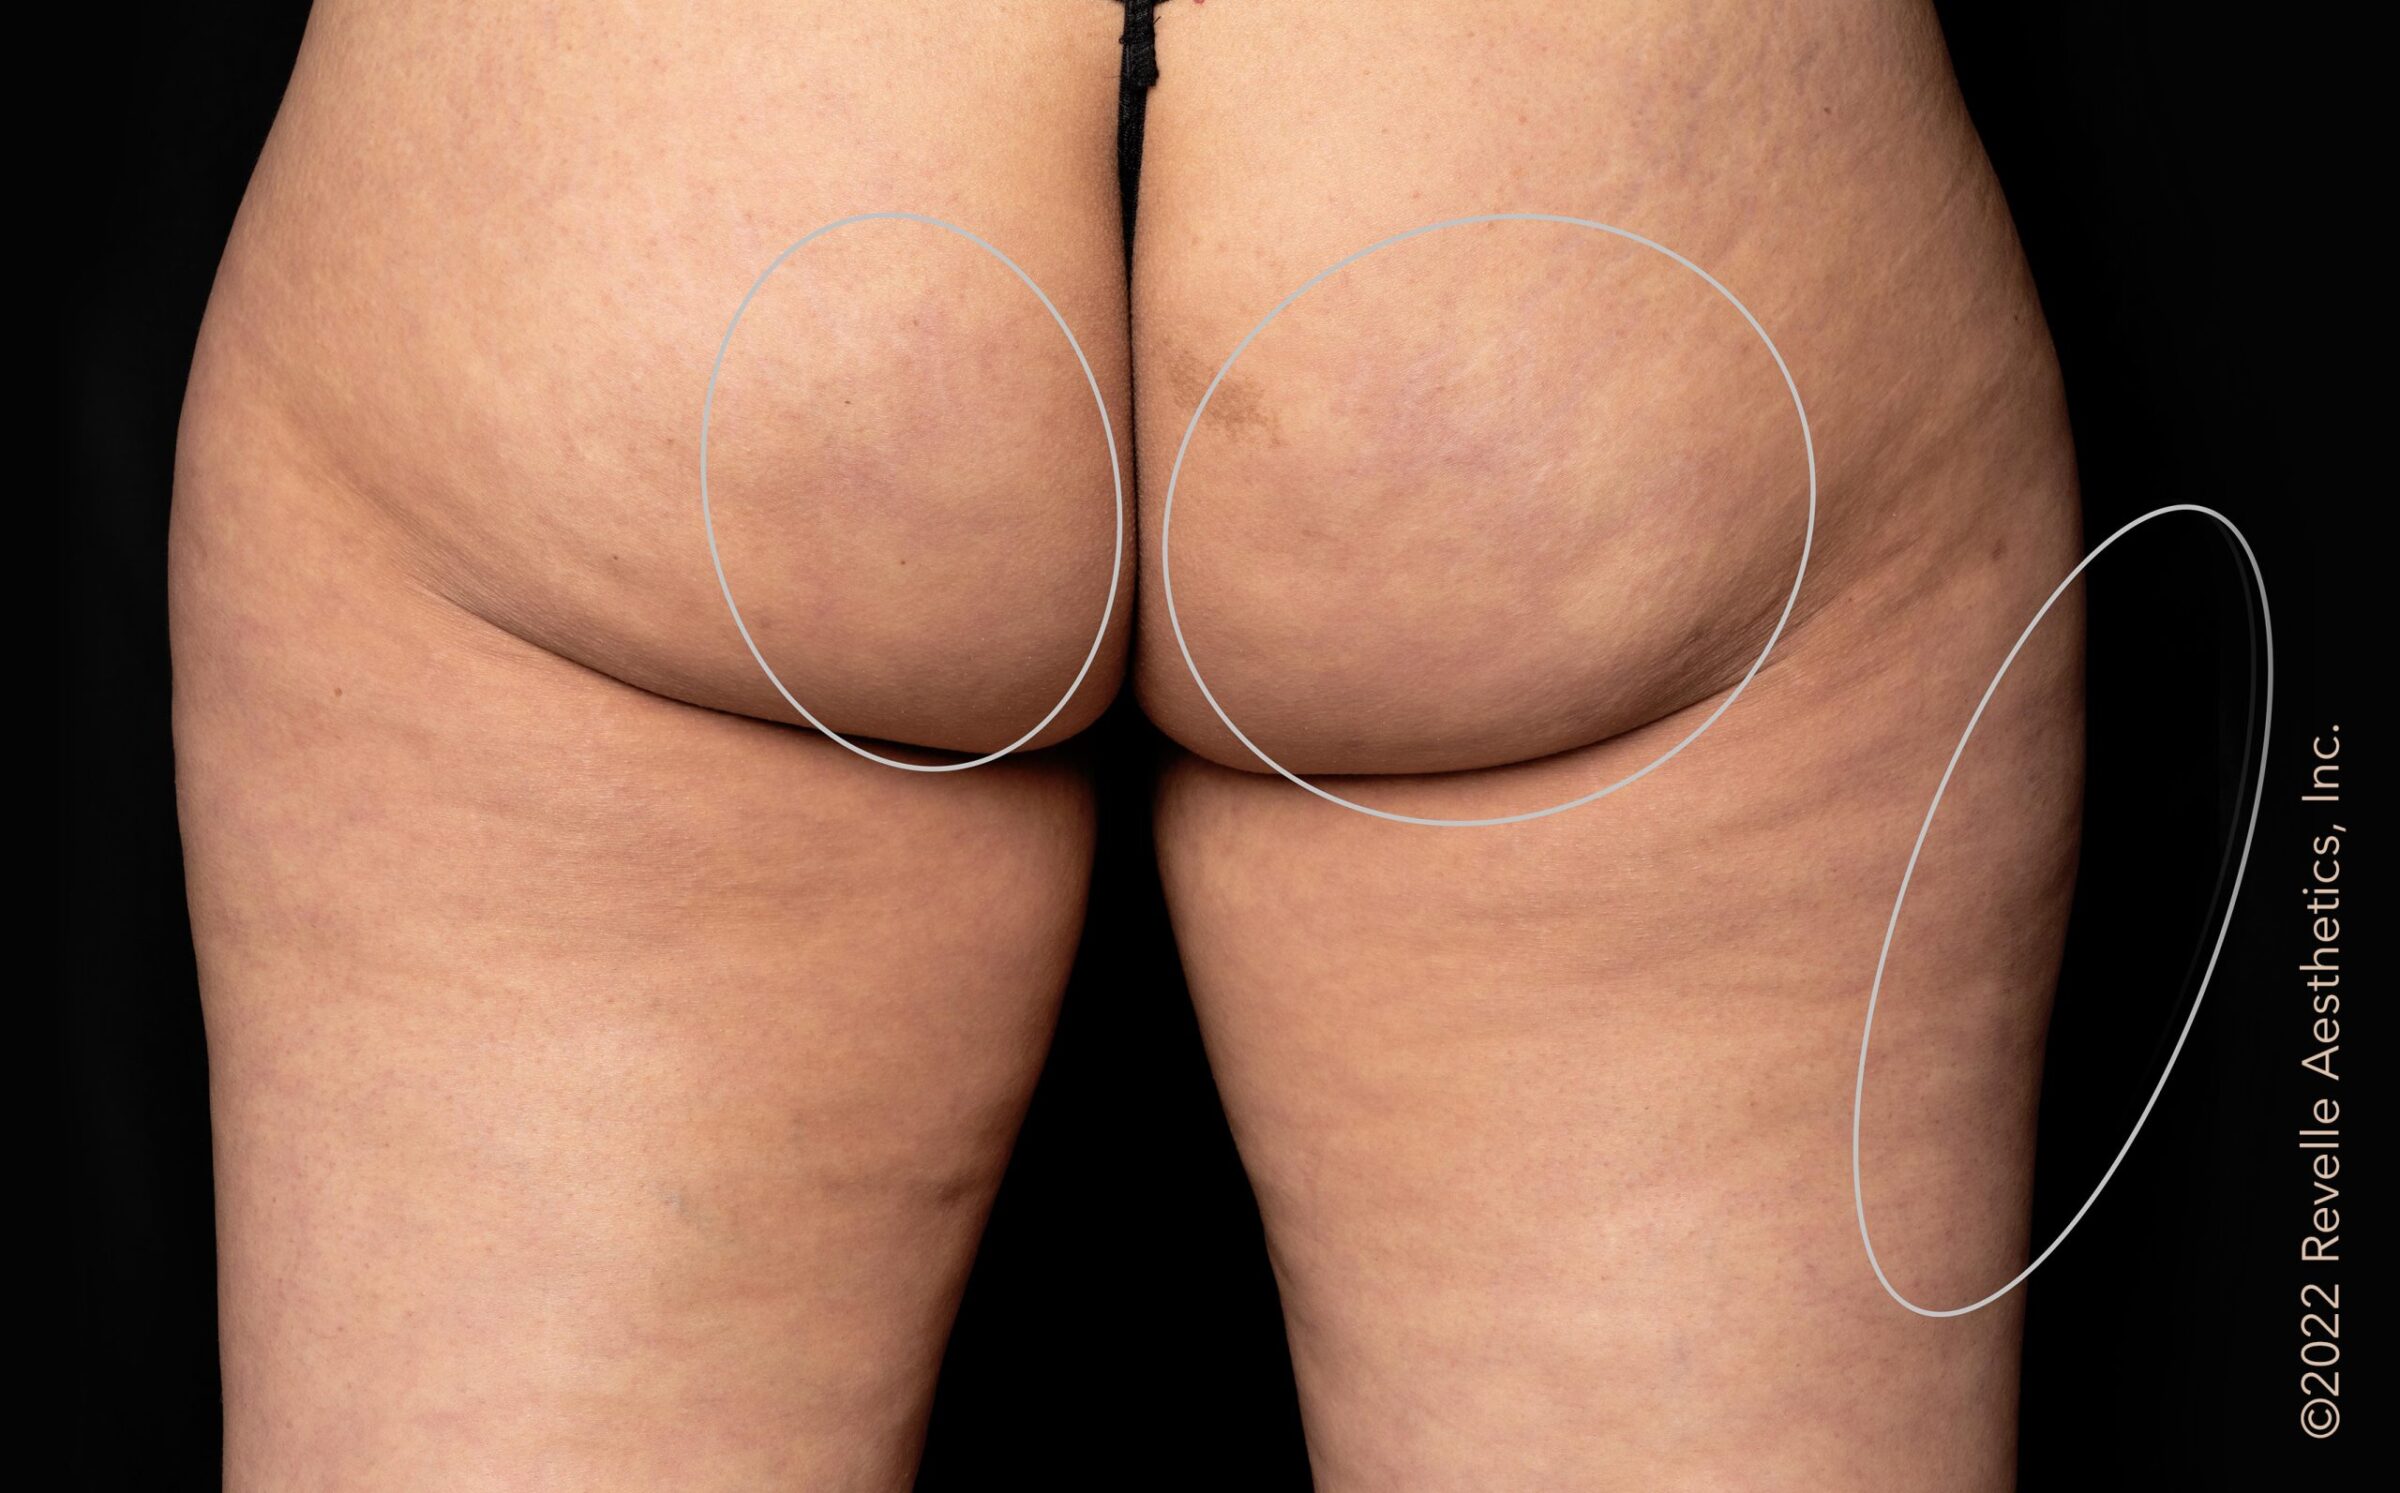 After aveli cellulite treatment